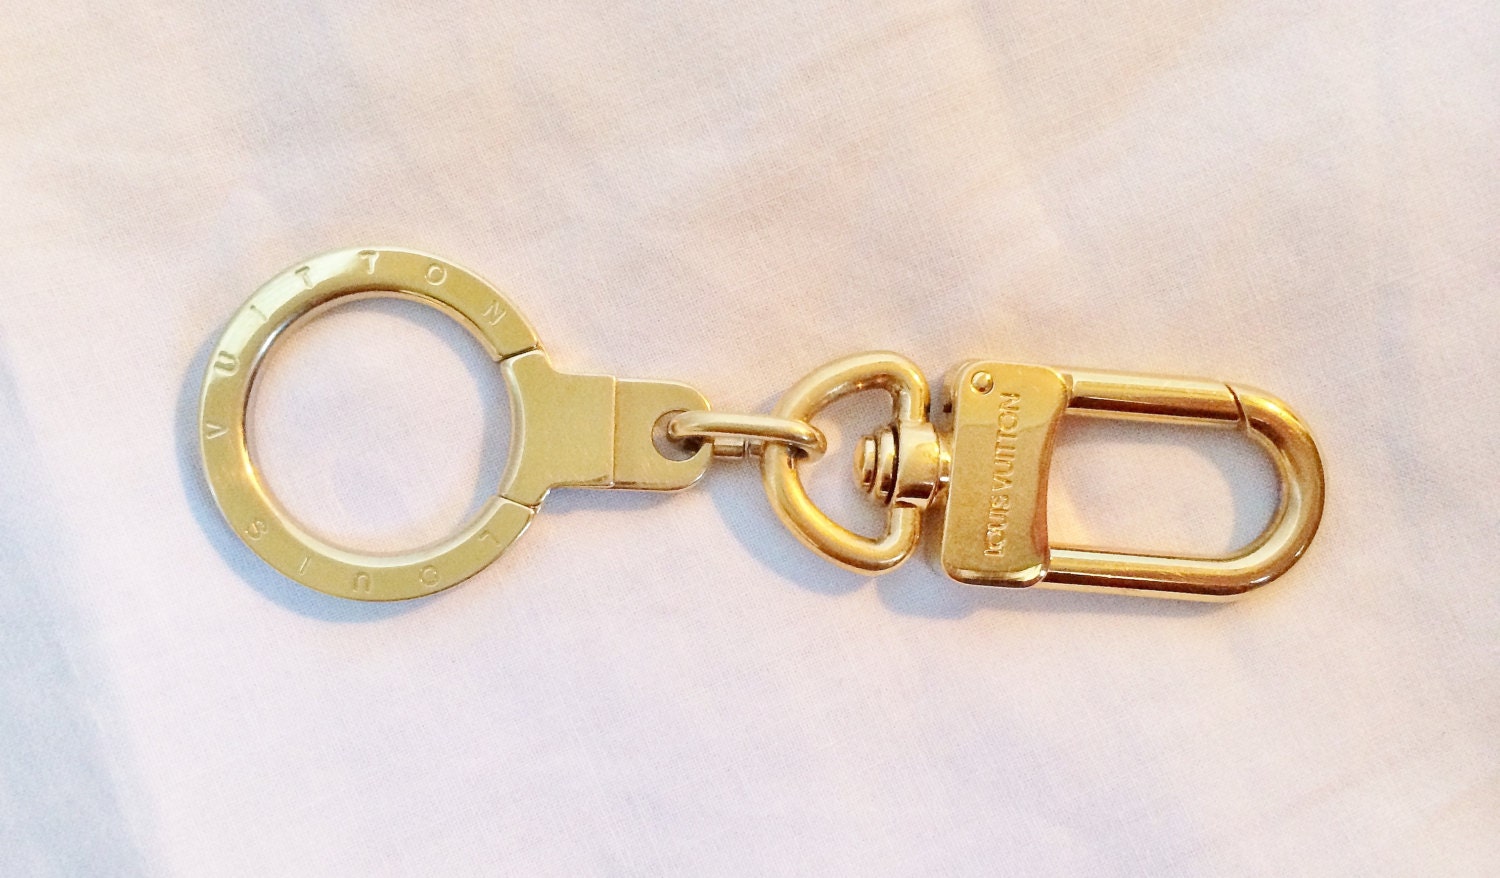 Items similar to Authentic Vintage Louis Vuitton Strap Extender Keychain Key Ring Bag Charm on Etsy